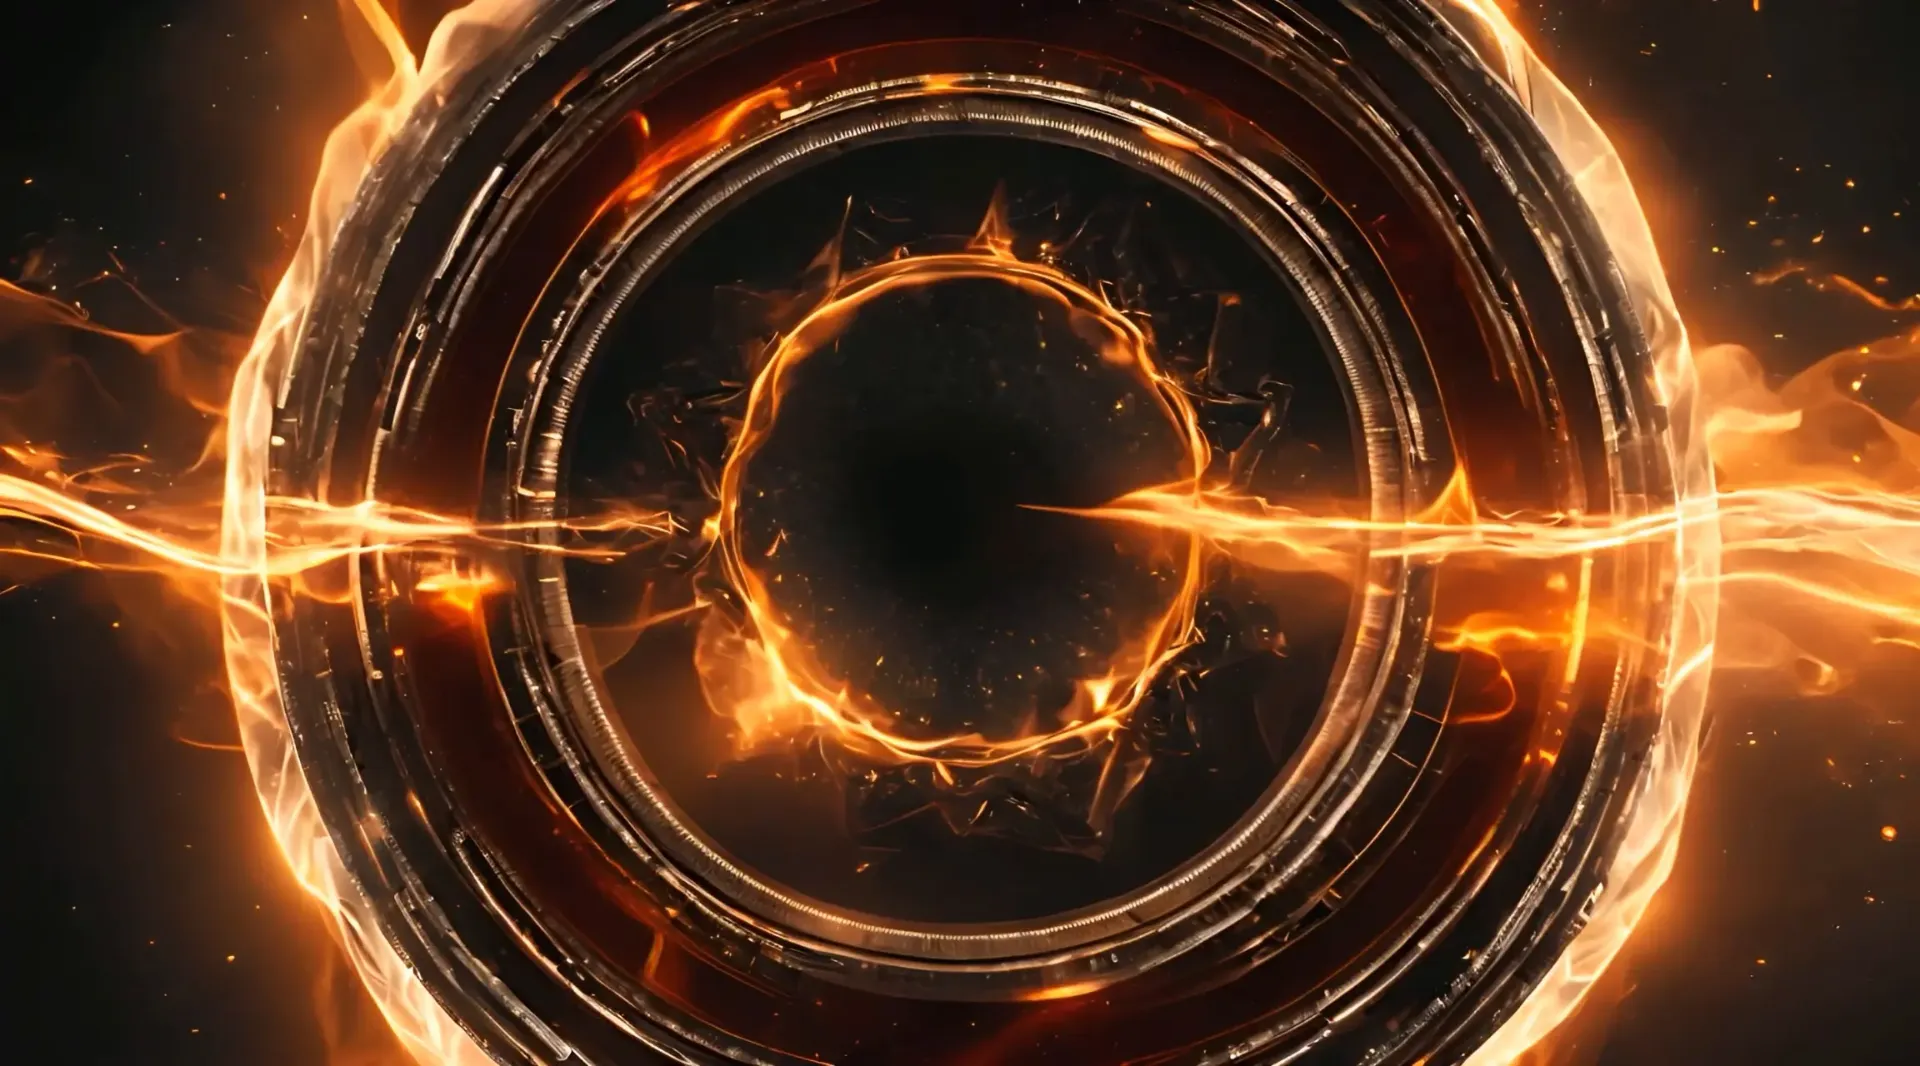 Fiery Portal Activation Cinematic Sci-Fi Background Video